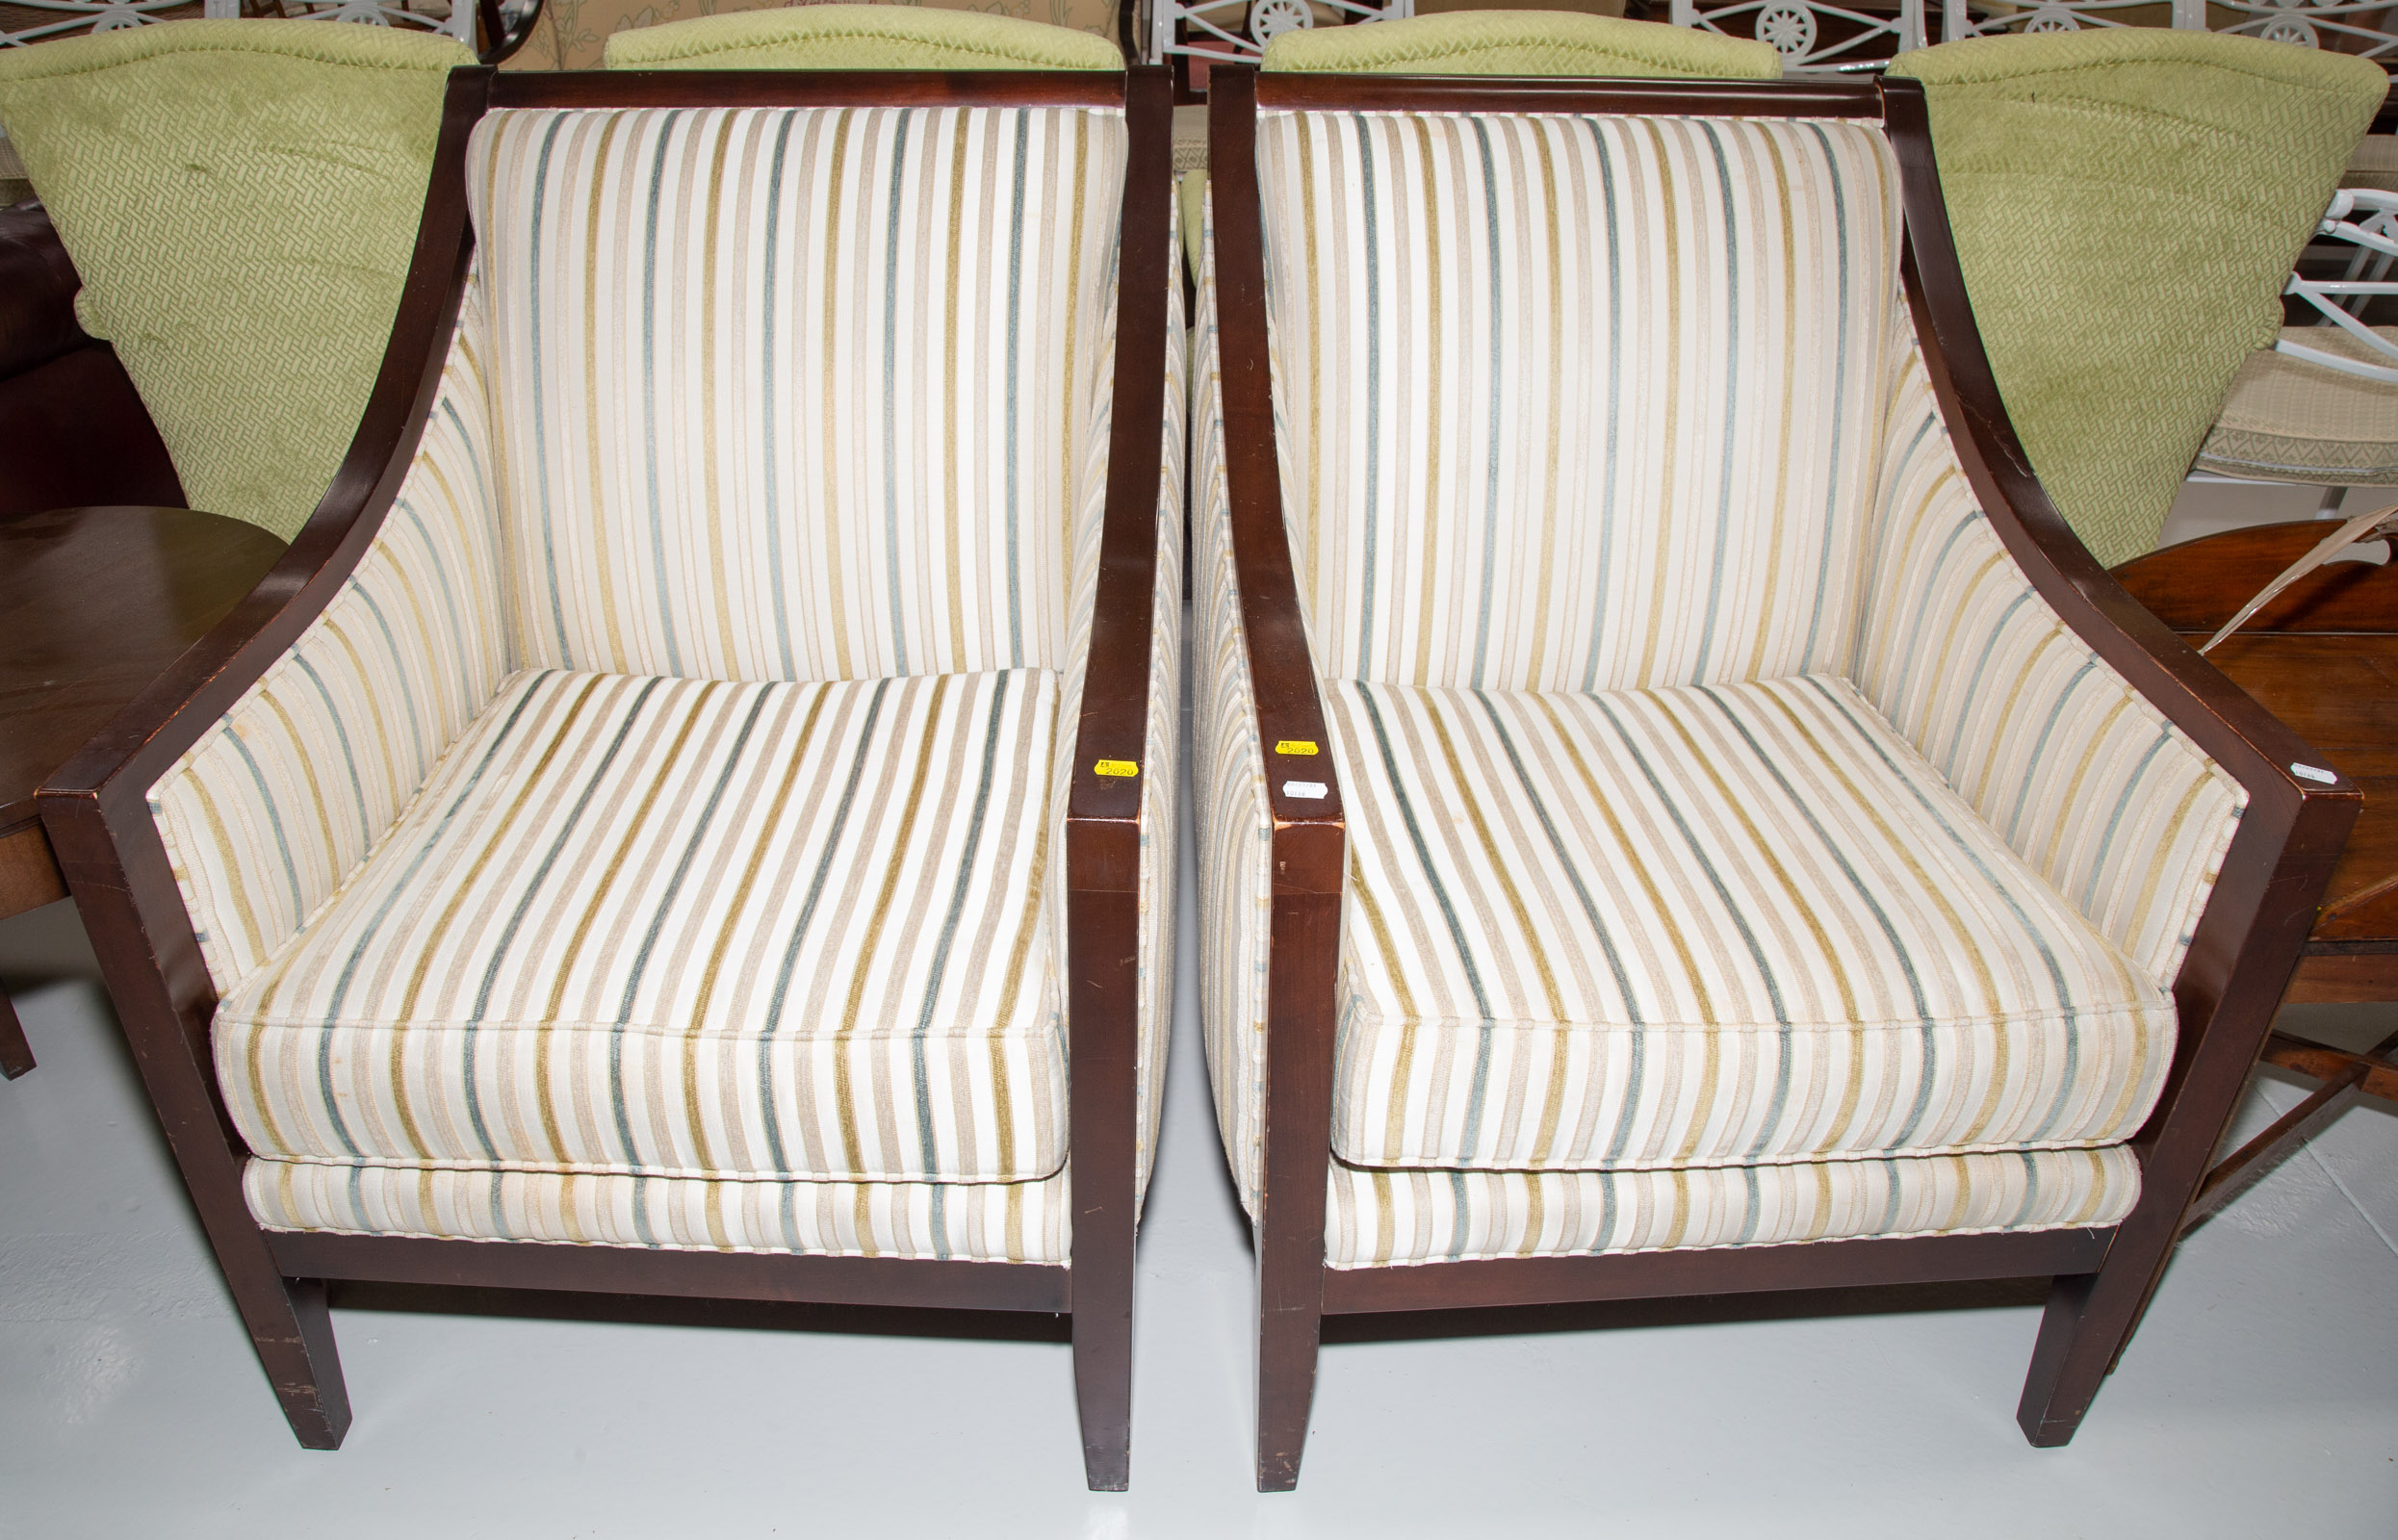 A PAIR OF ART DECO STYLE LOUNGE CHAIRS